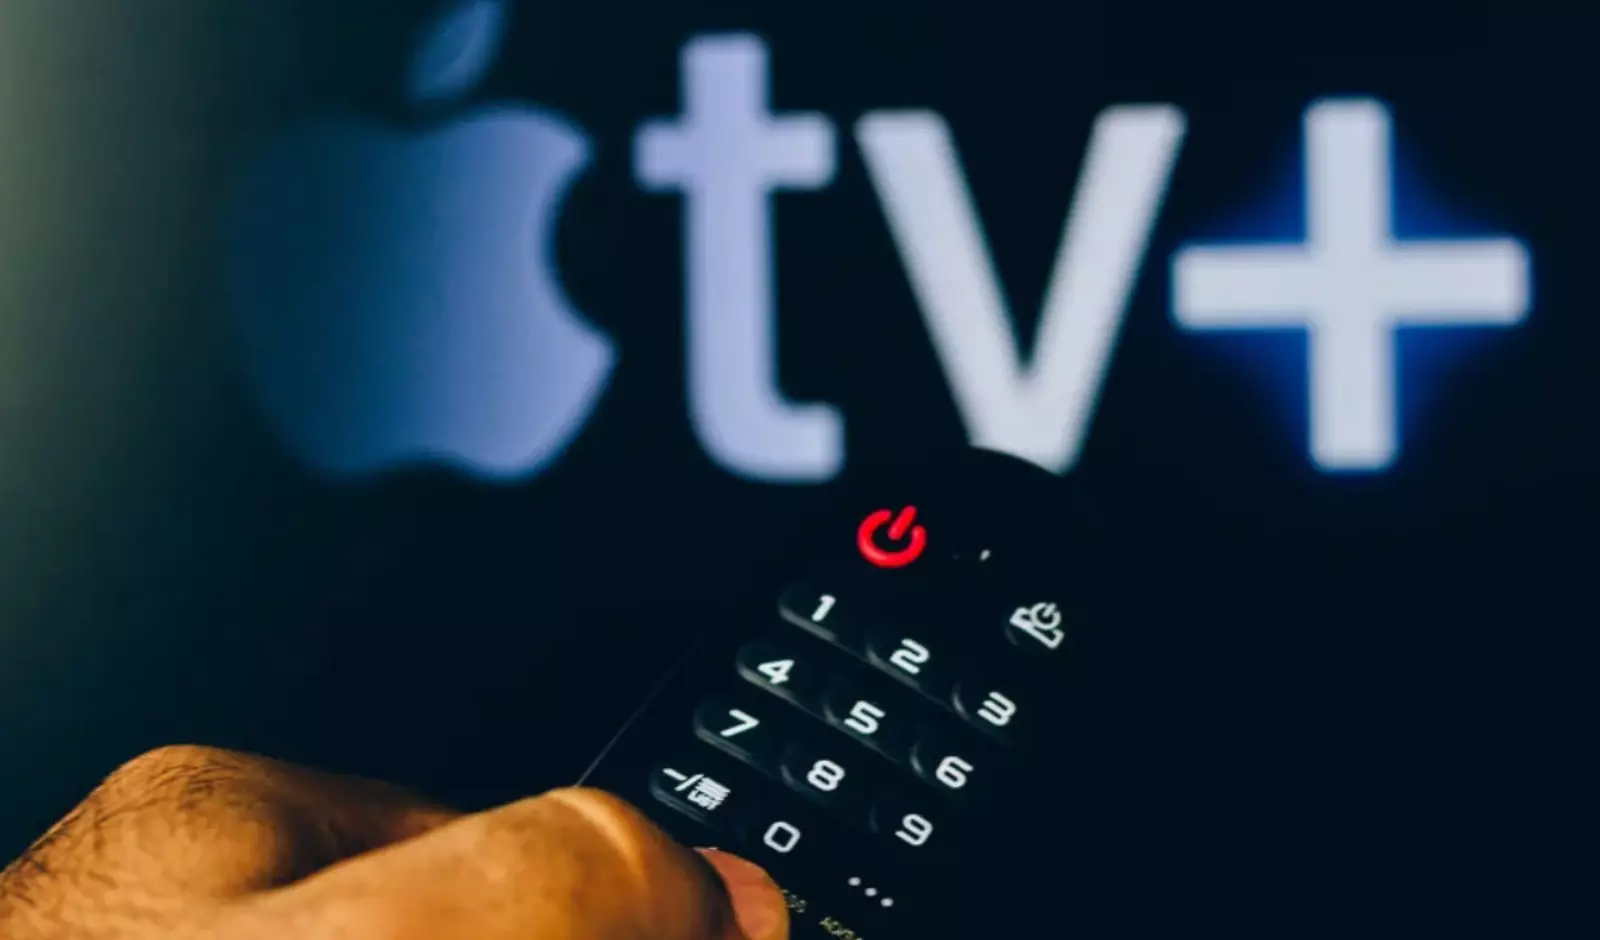 Apple Upgrades TV App and Raises Apple TV+ Prices for Bigger Streaming Presence